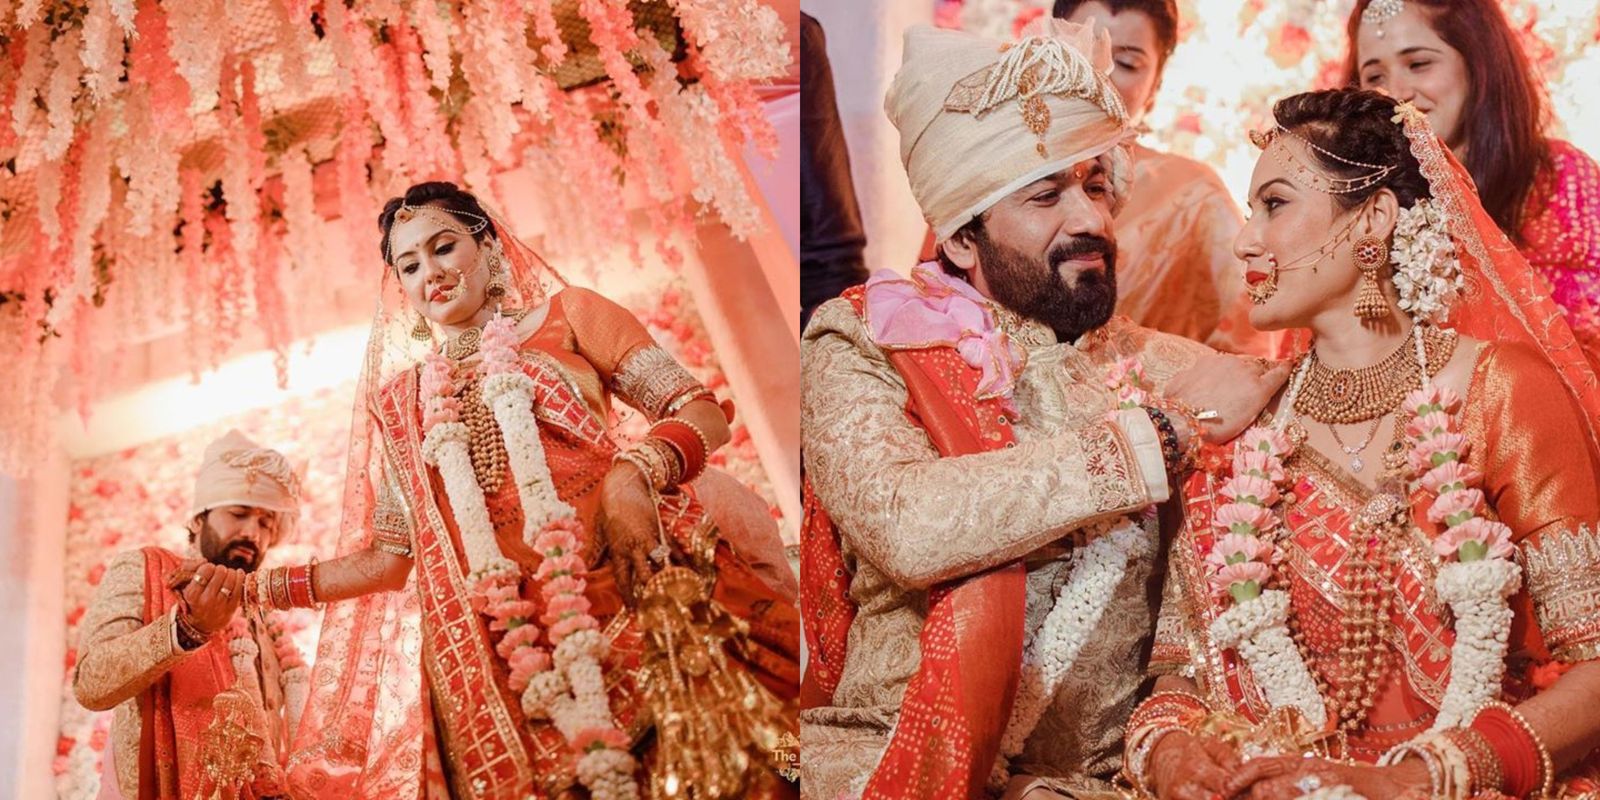 Mrs. Kamya Shalabh Dang, TV Actress Makes It Insta Official; See All Inside Pictures And Videos From Her Wedding